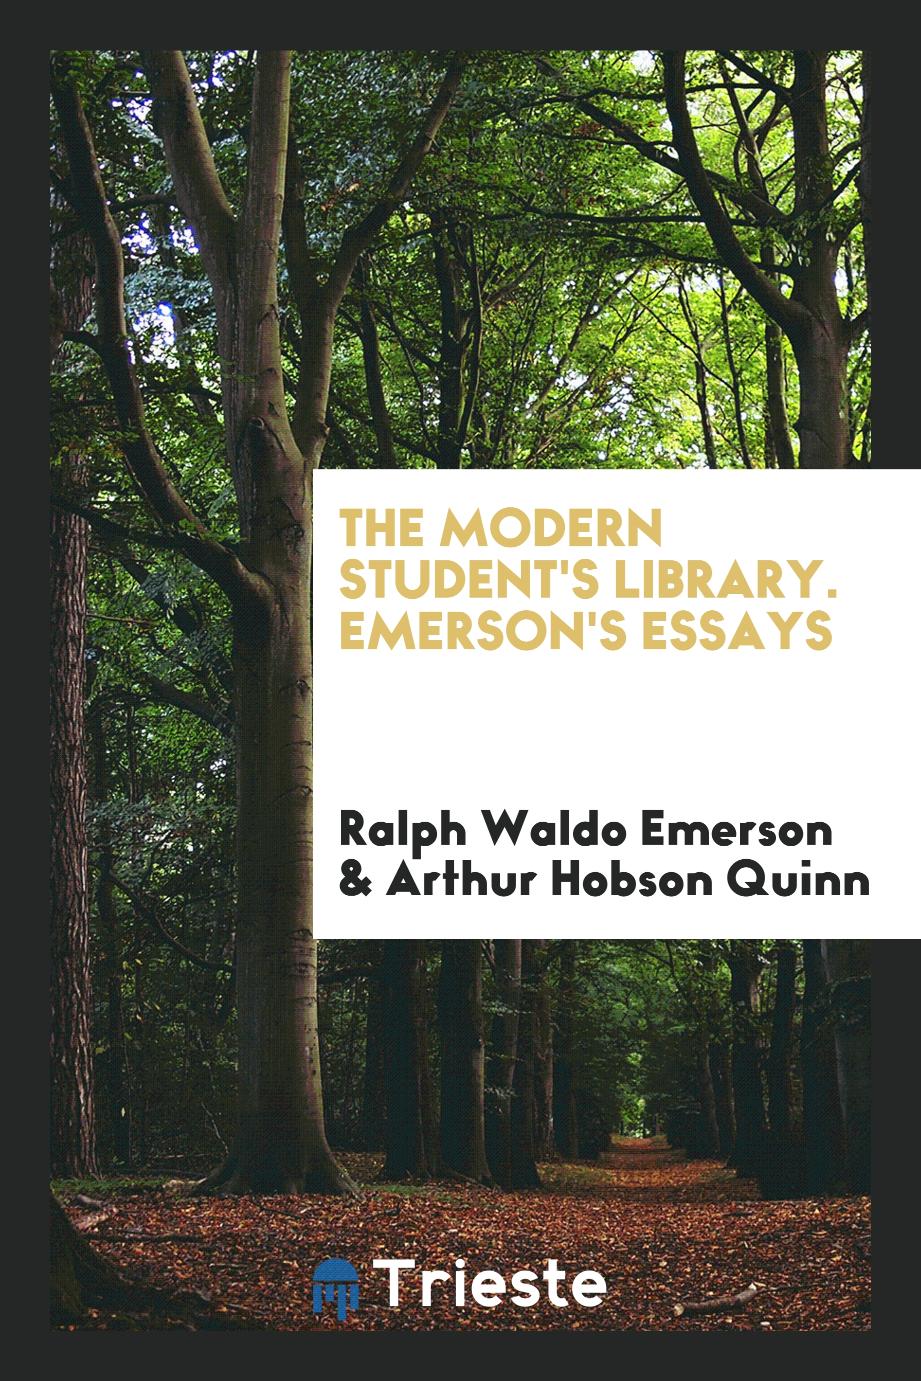 The Modern Student's Library. Emerson's Essays